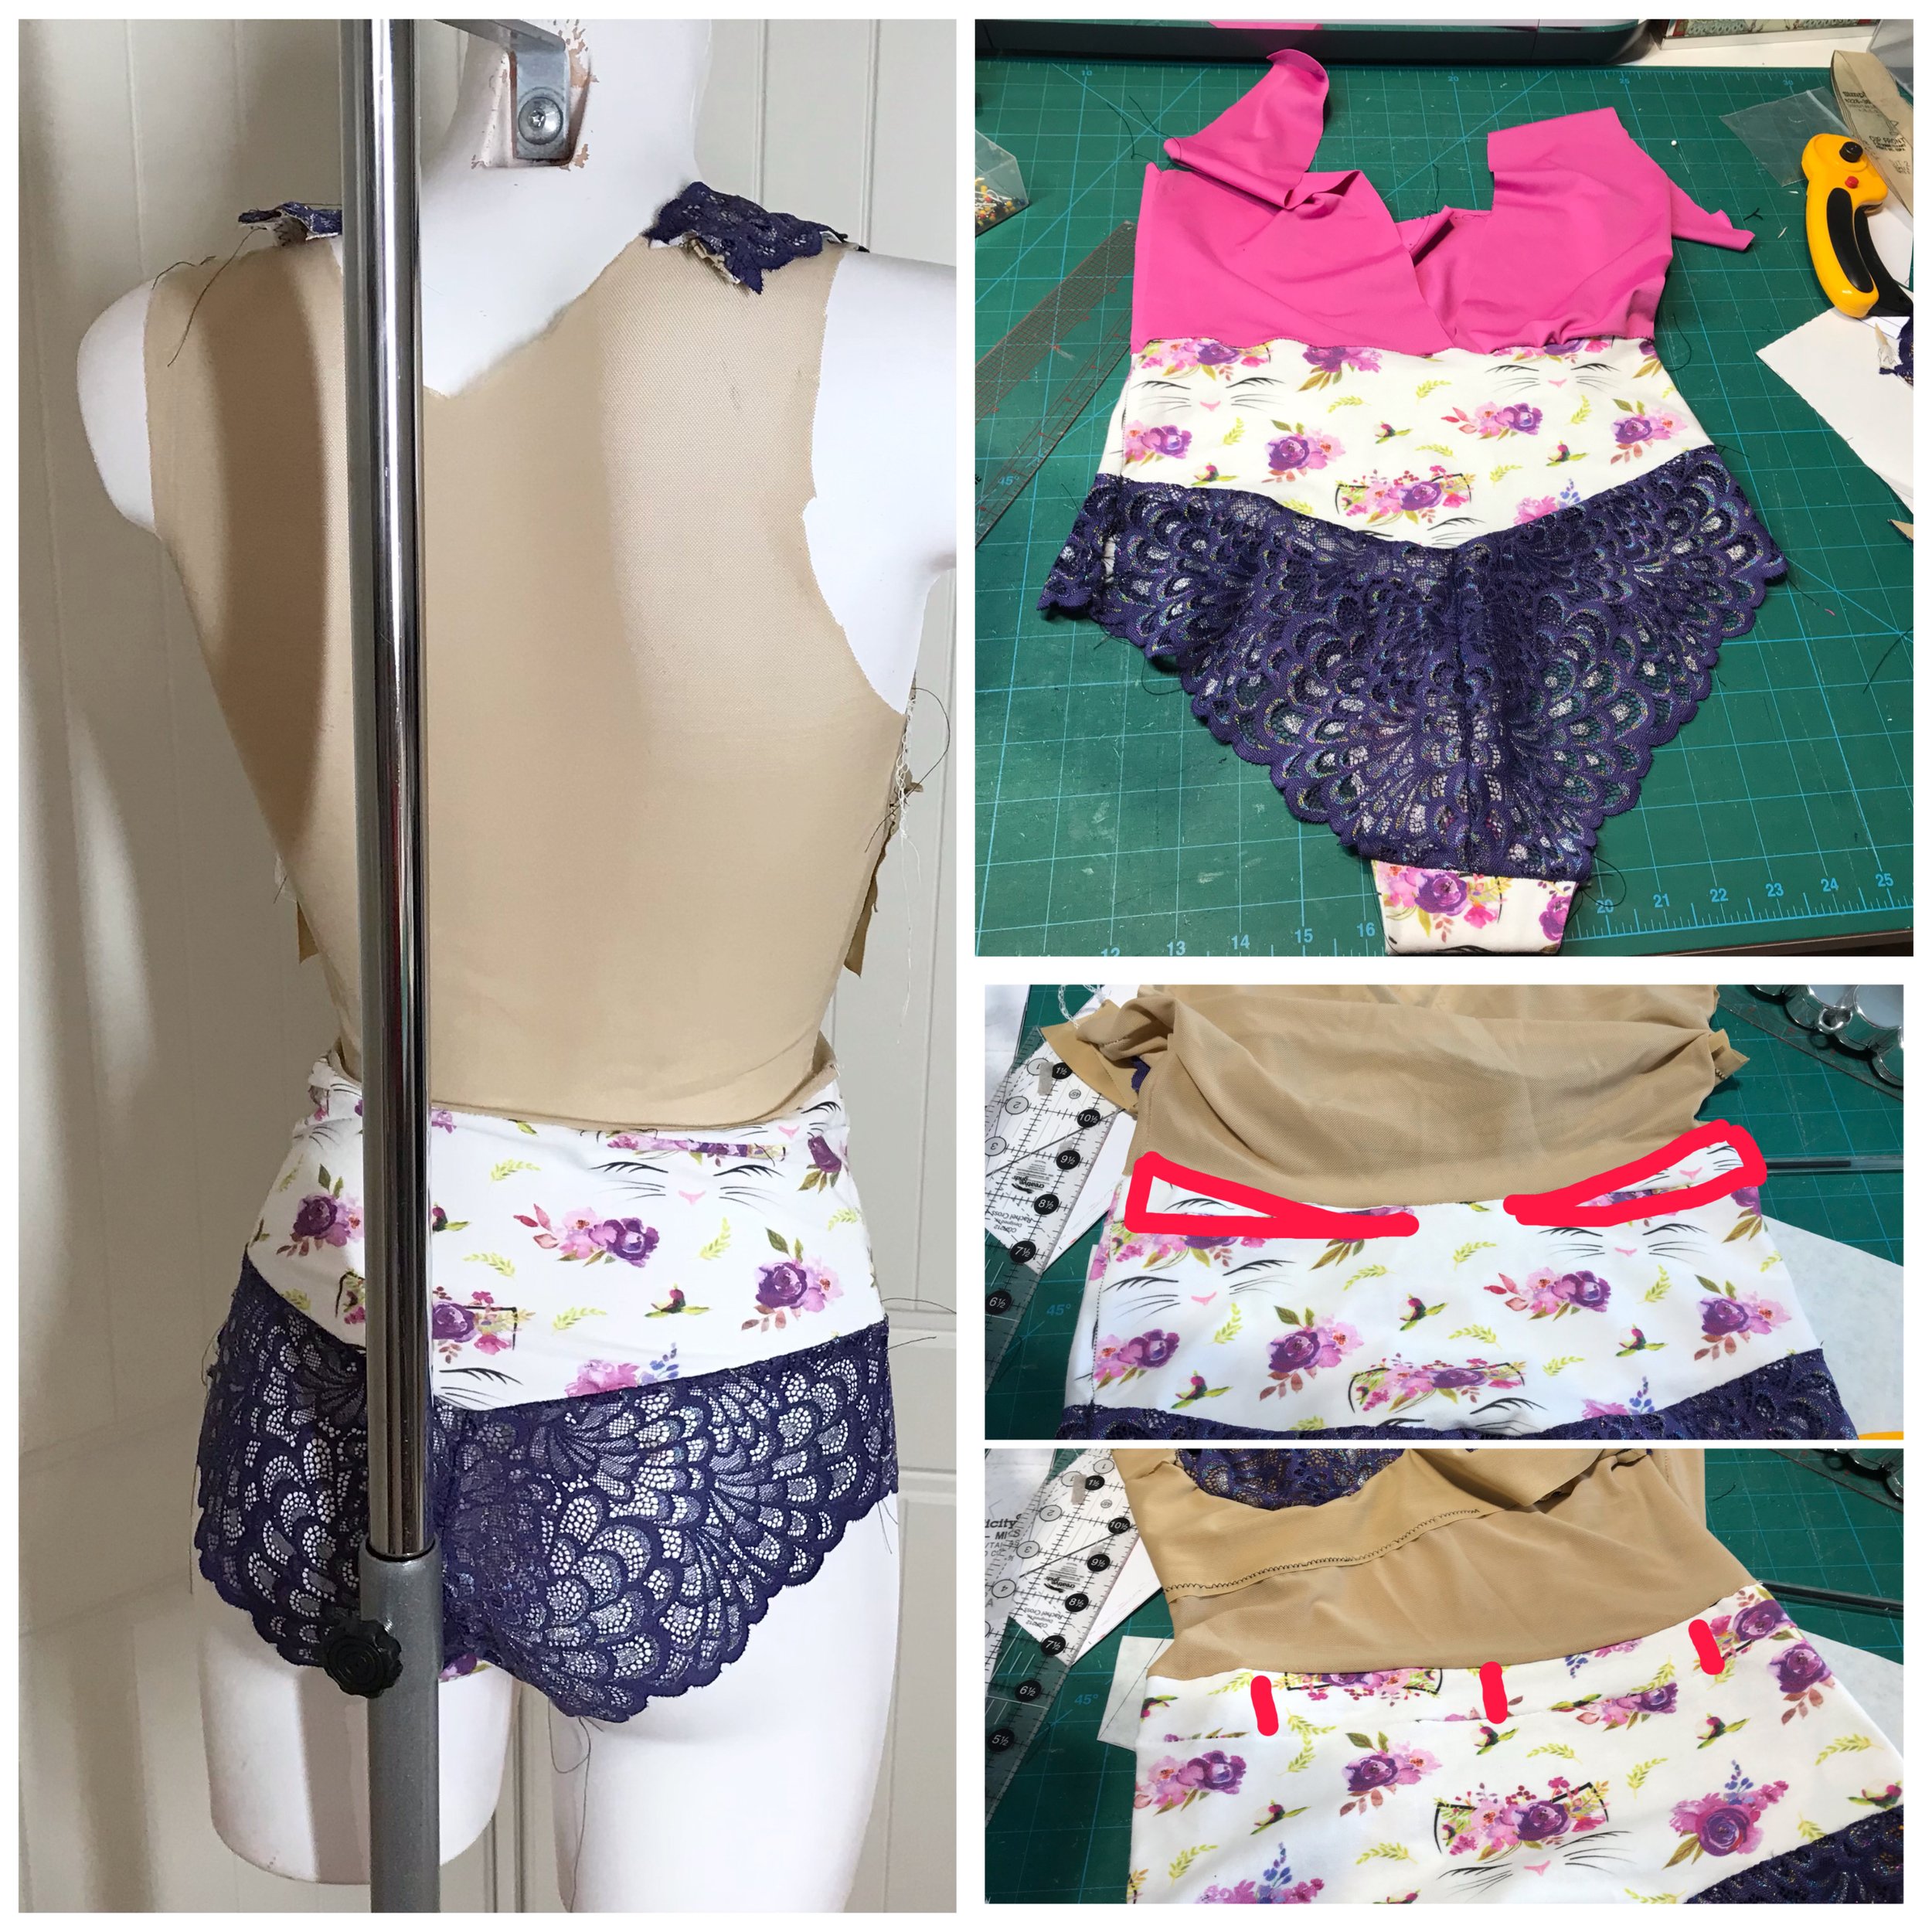 Ariel Bra Cup Pattern by Porcelynne - Part 2 - Sewing the Bra Cups